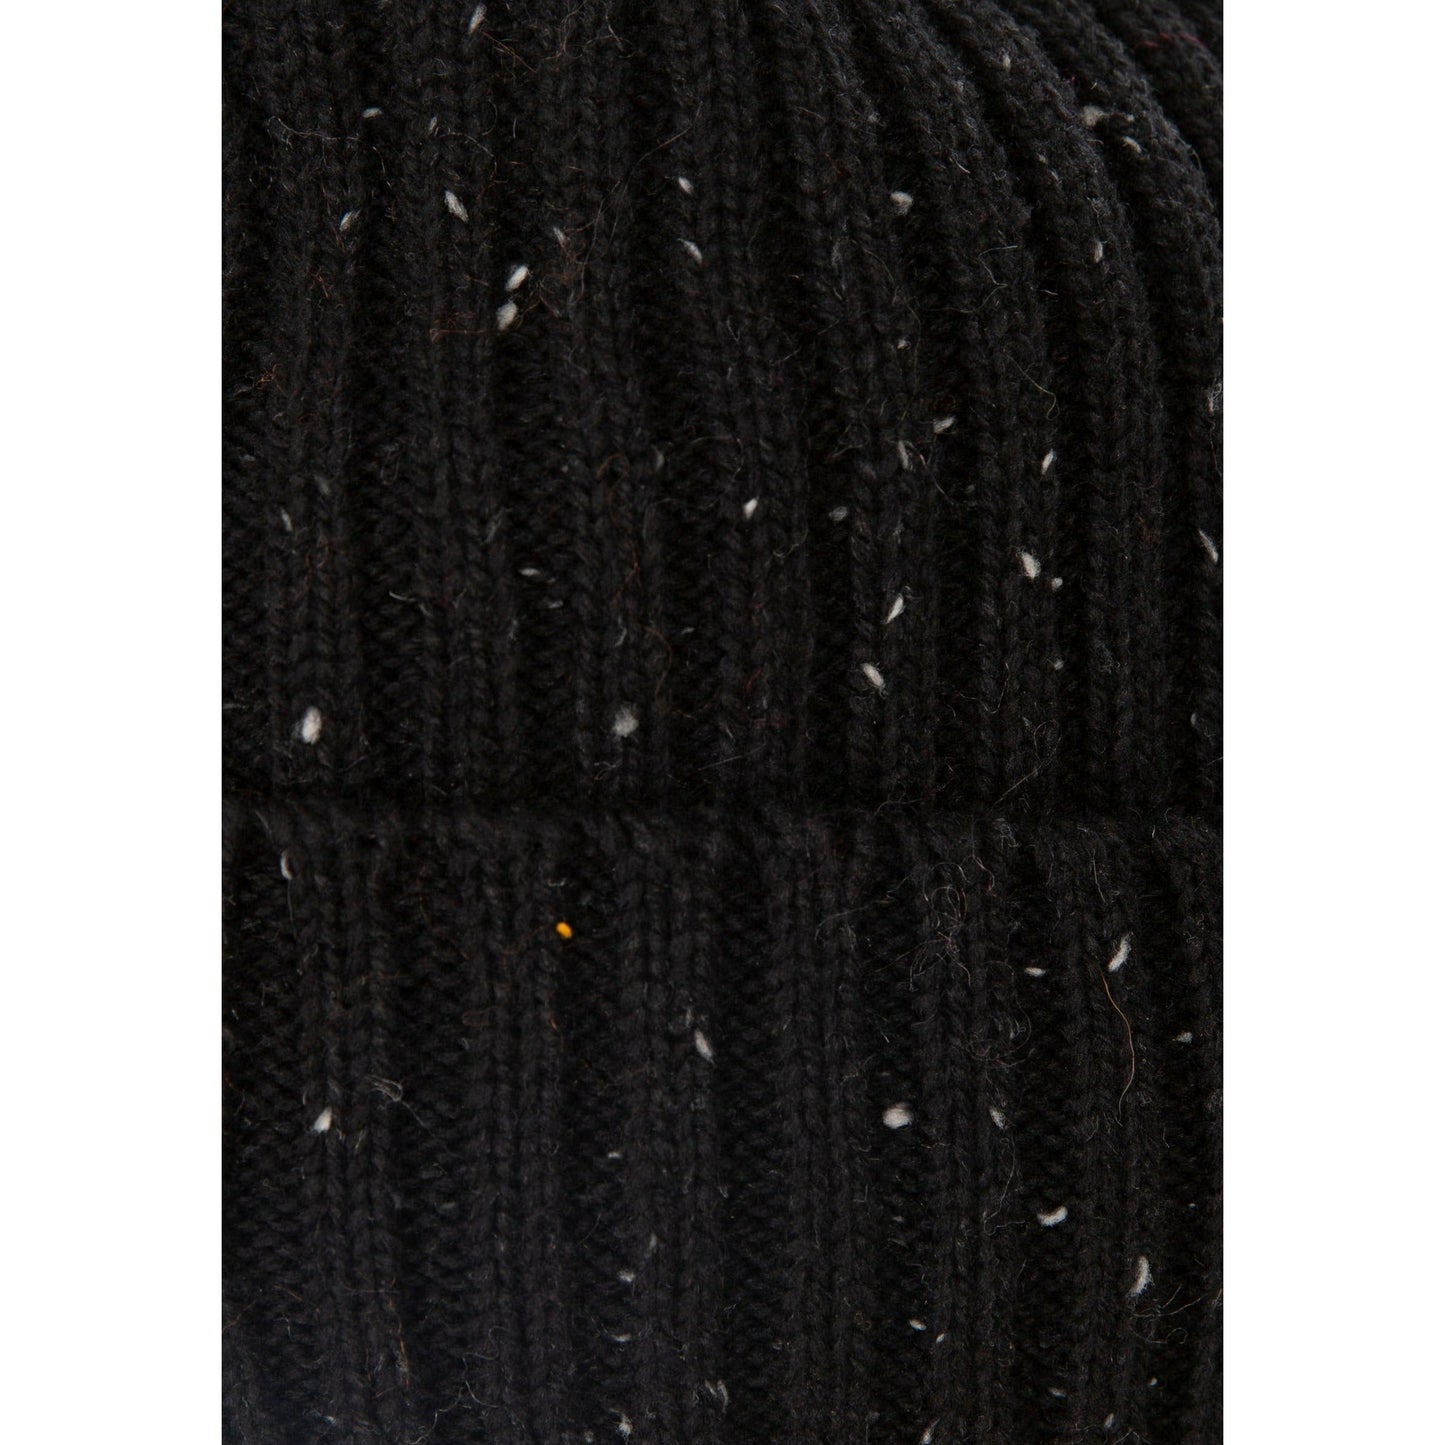 Mateo Lined Knitted Beanie Hat in Black